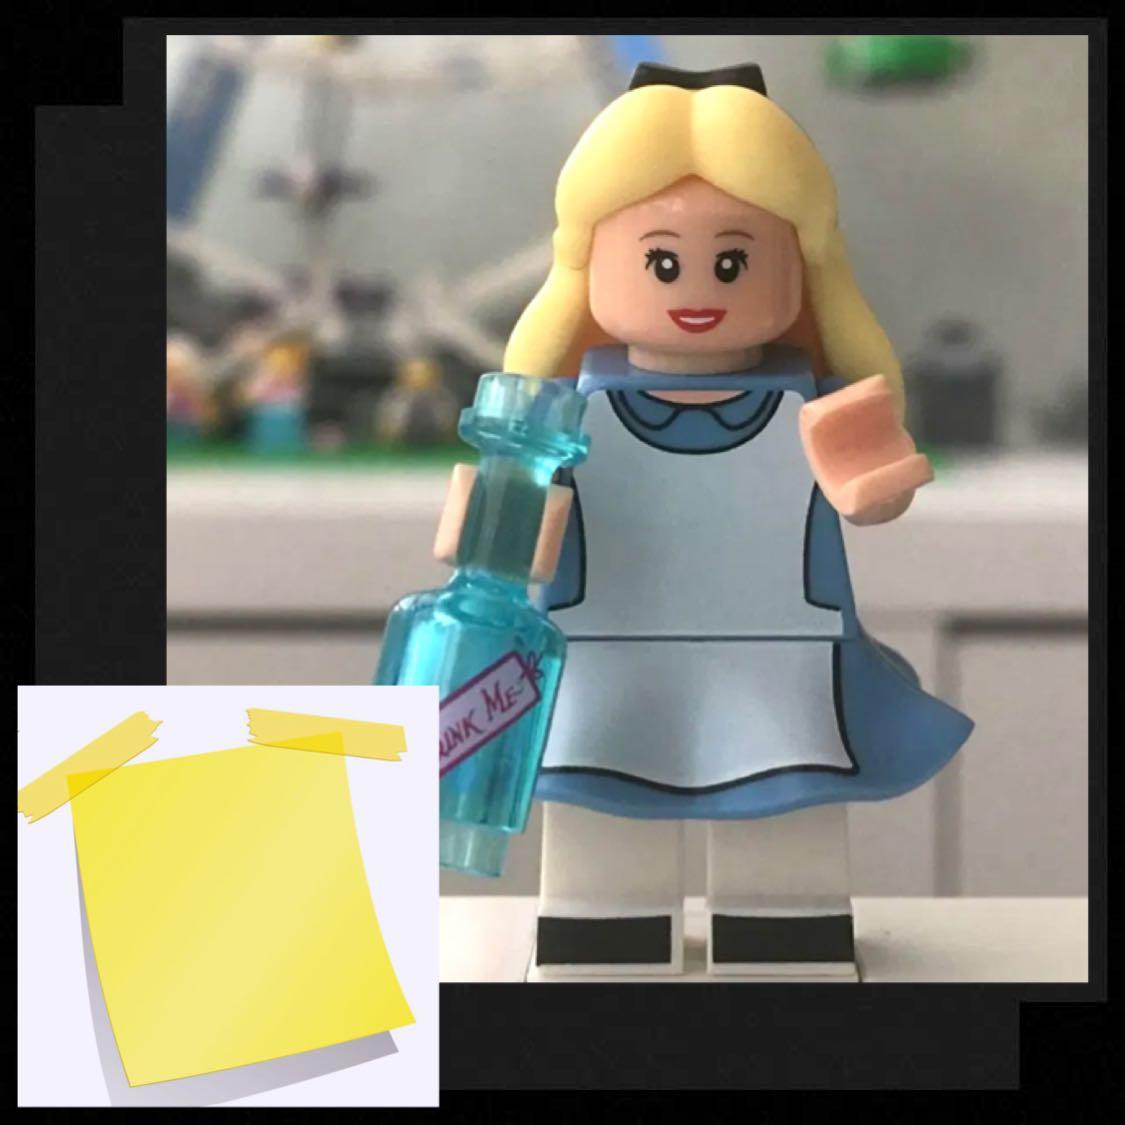 Lego Reveals Its Newest Minifigure Line Featuring Disney